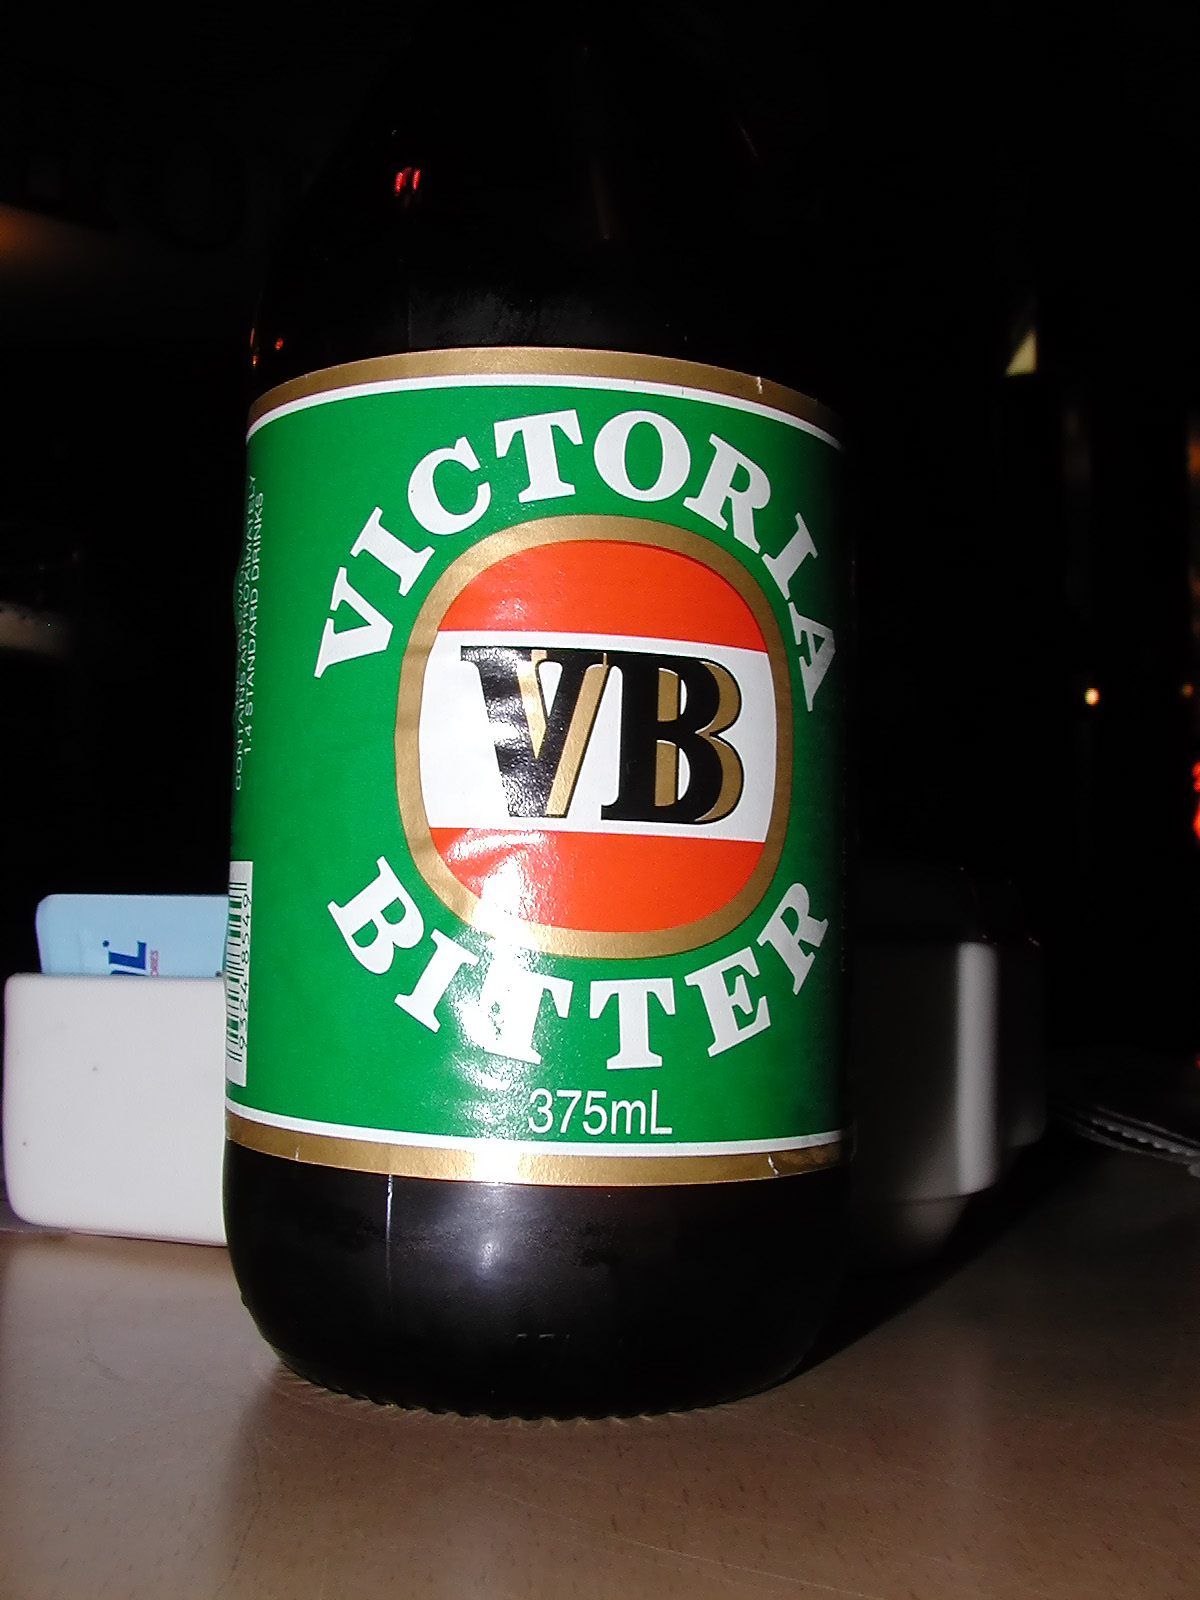 16-Jun-2001 21:31 - Sydney - Victoria Bitter - Beer Label - Continuing the tradition of 